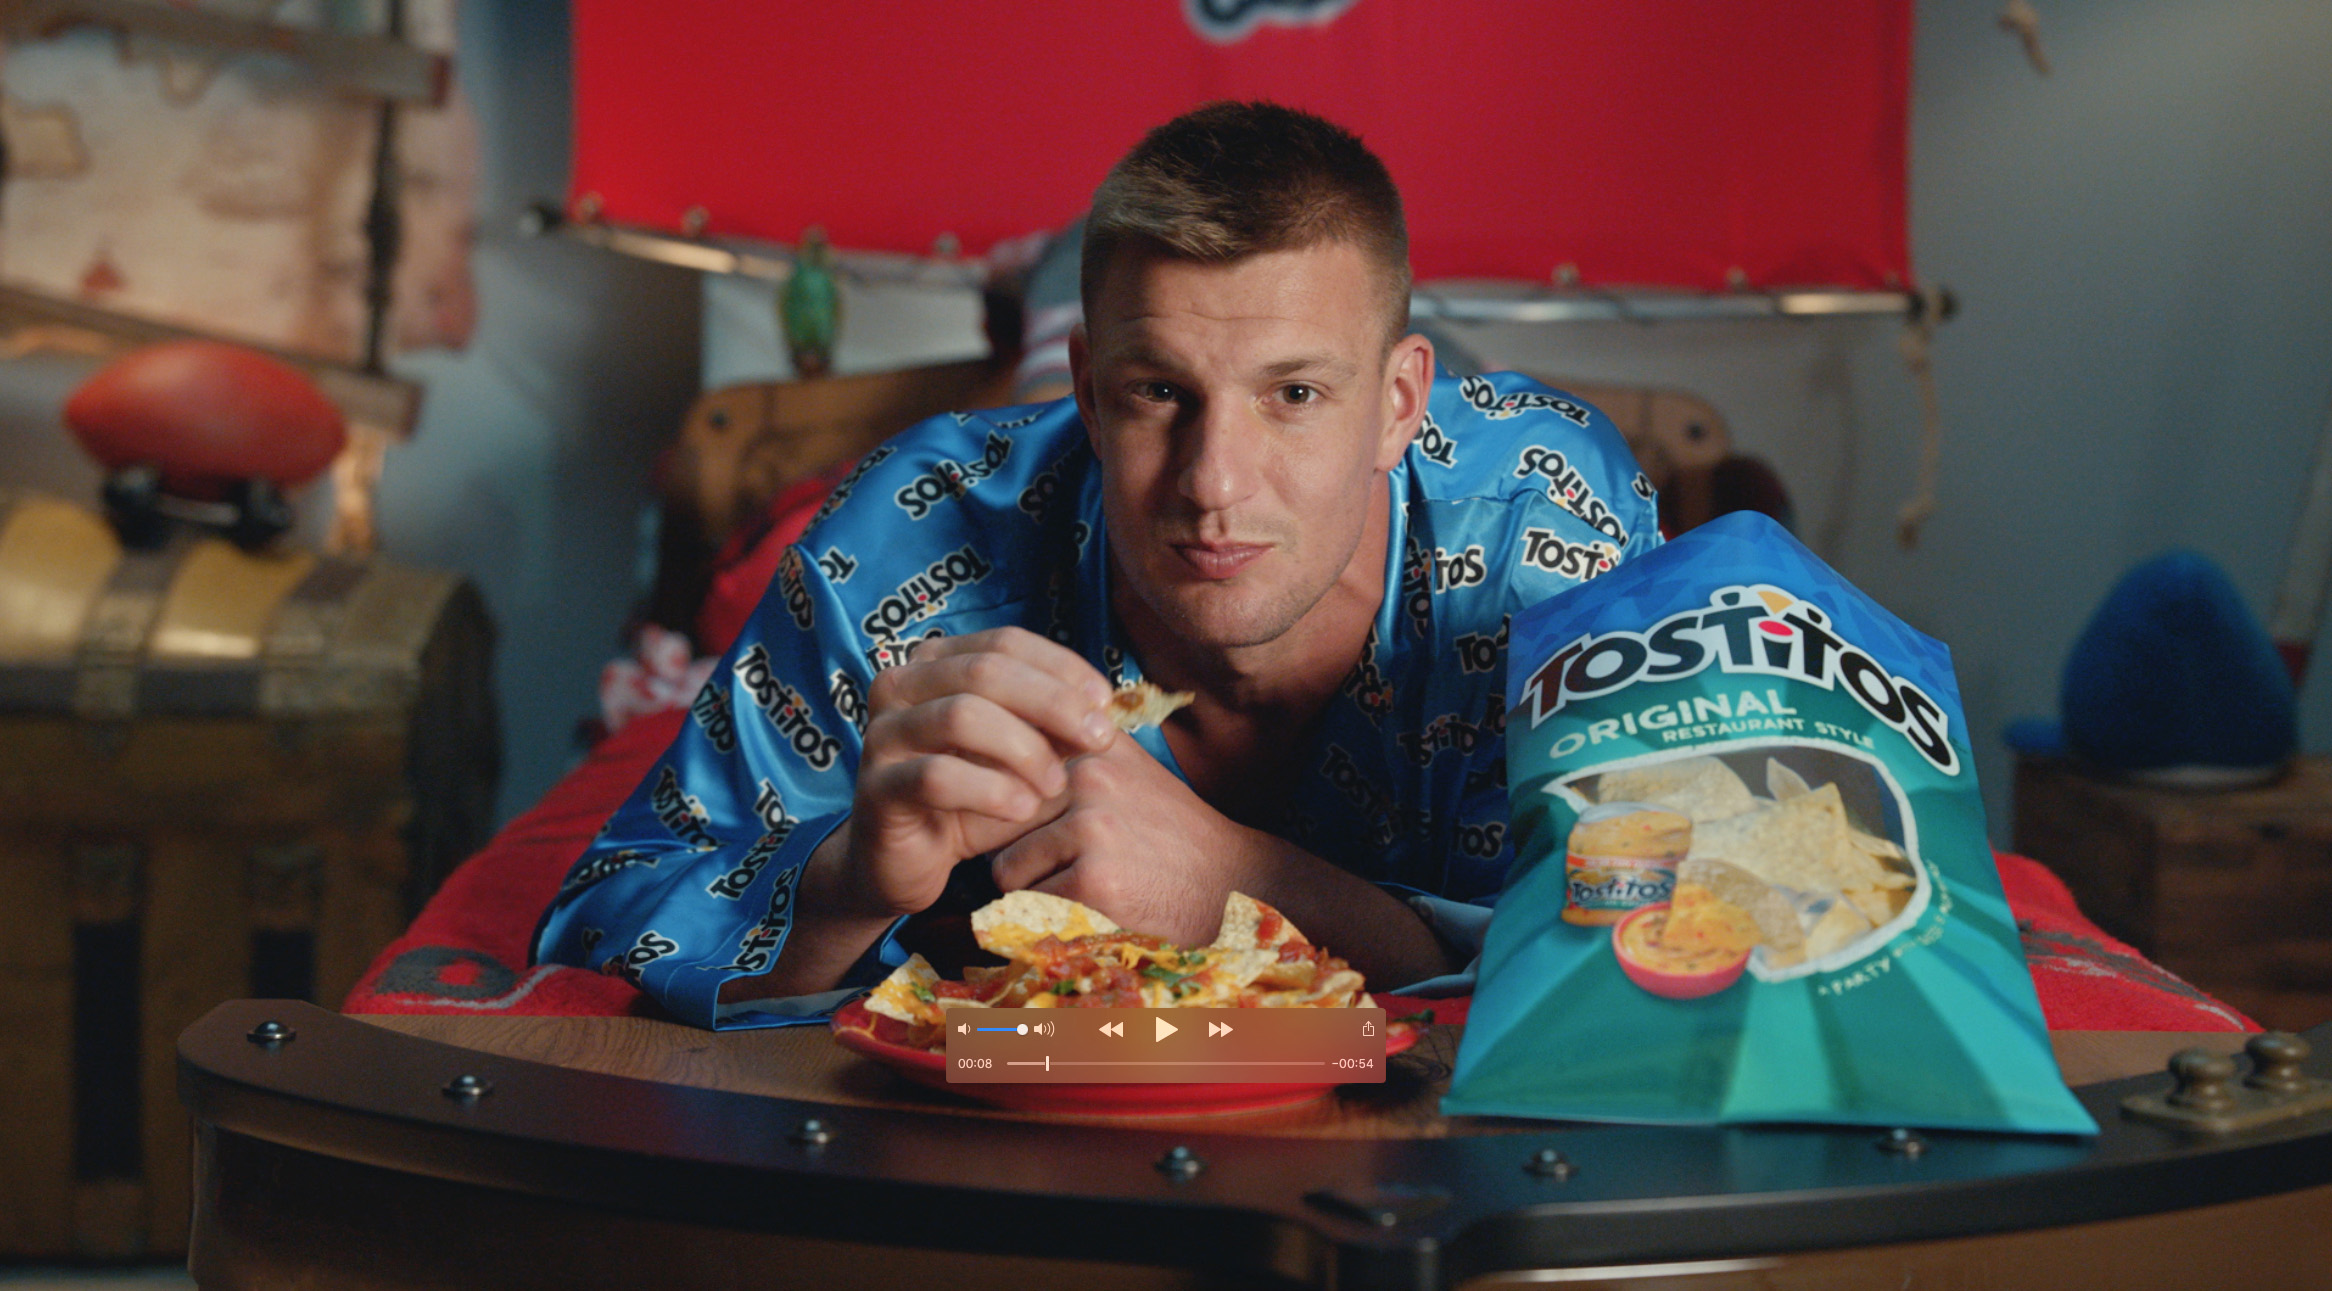 Gronkowski eating Tostitos chips